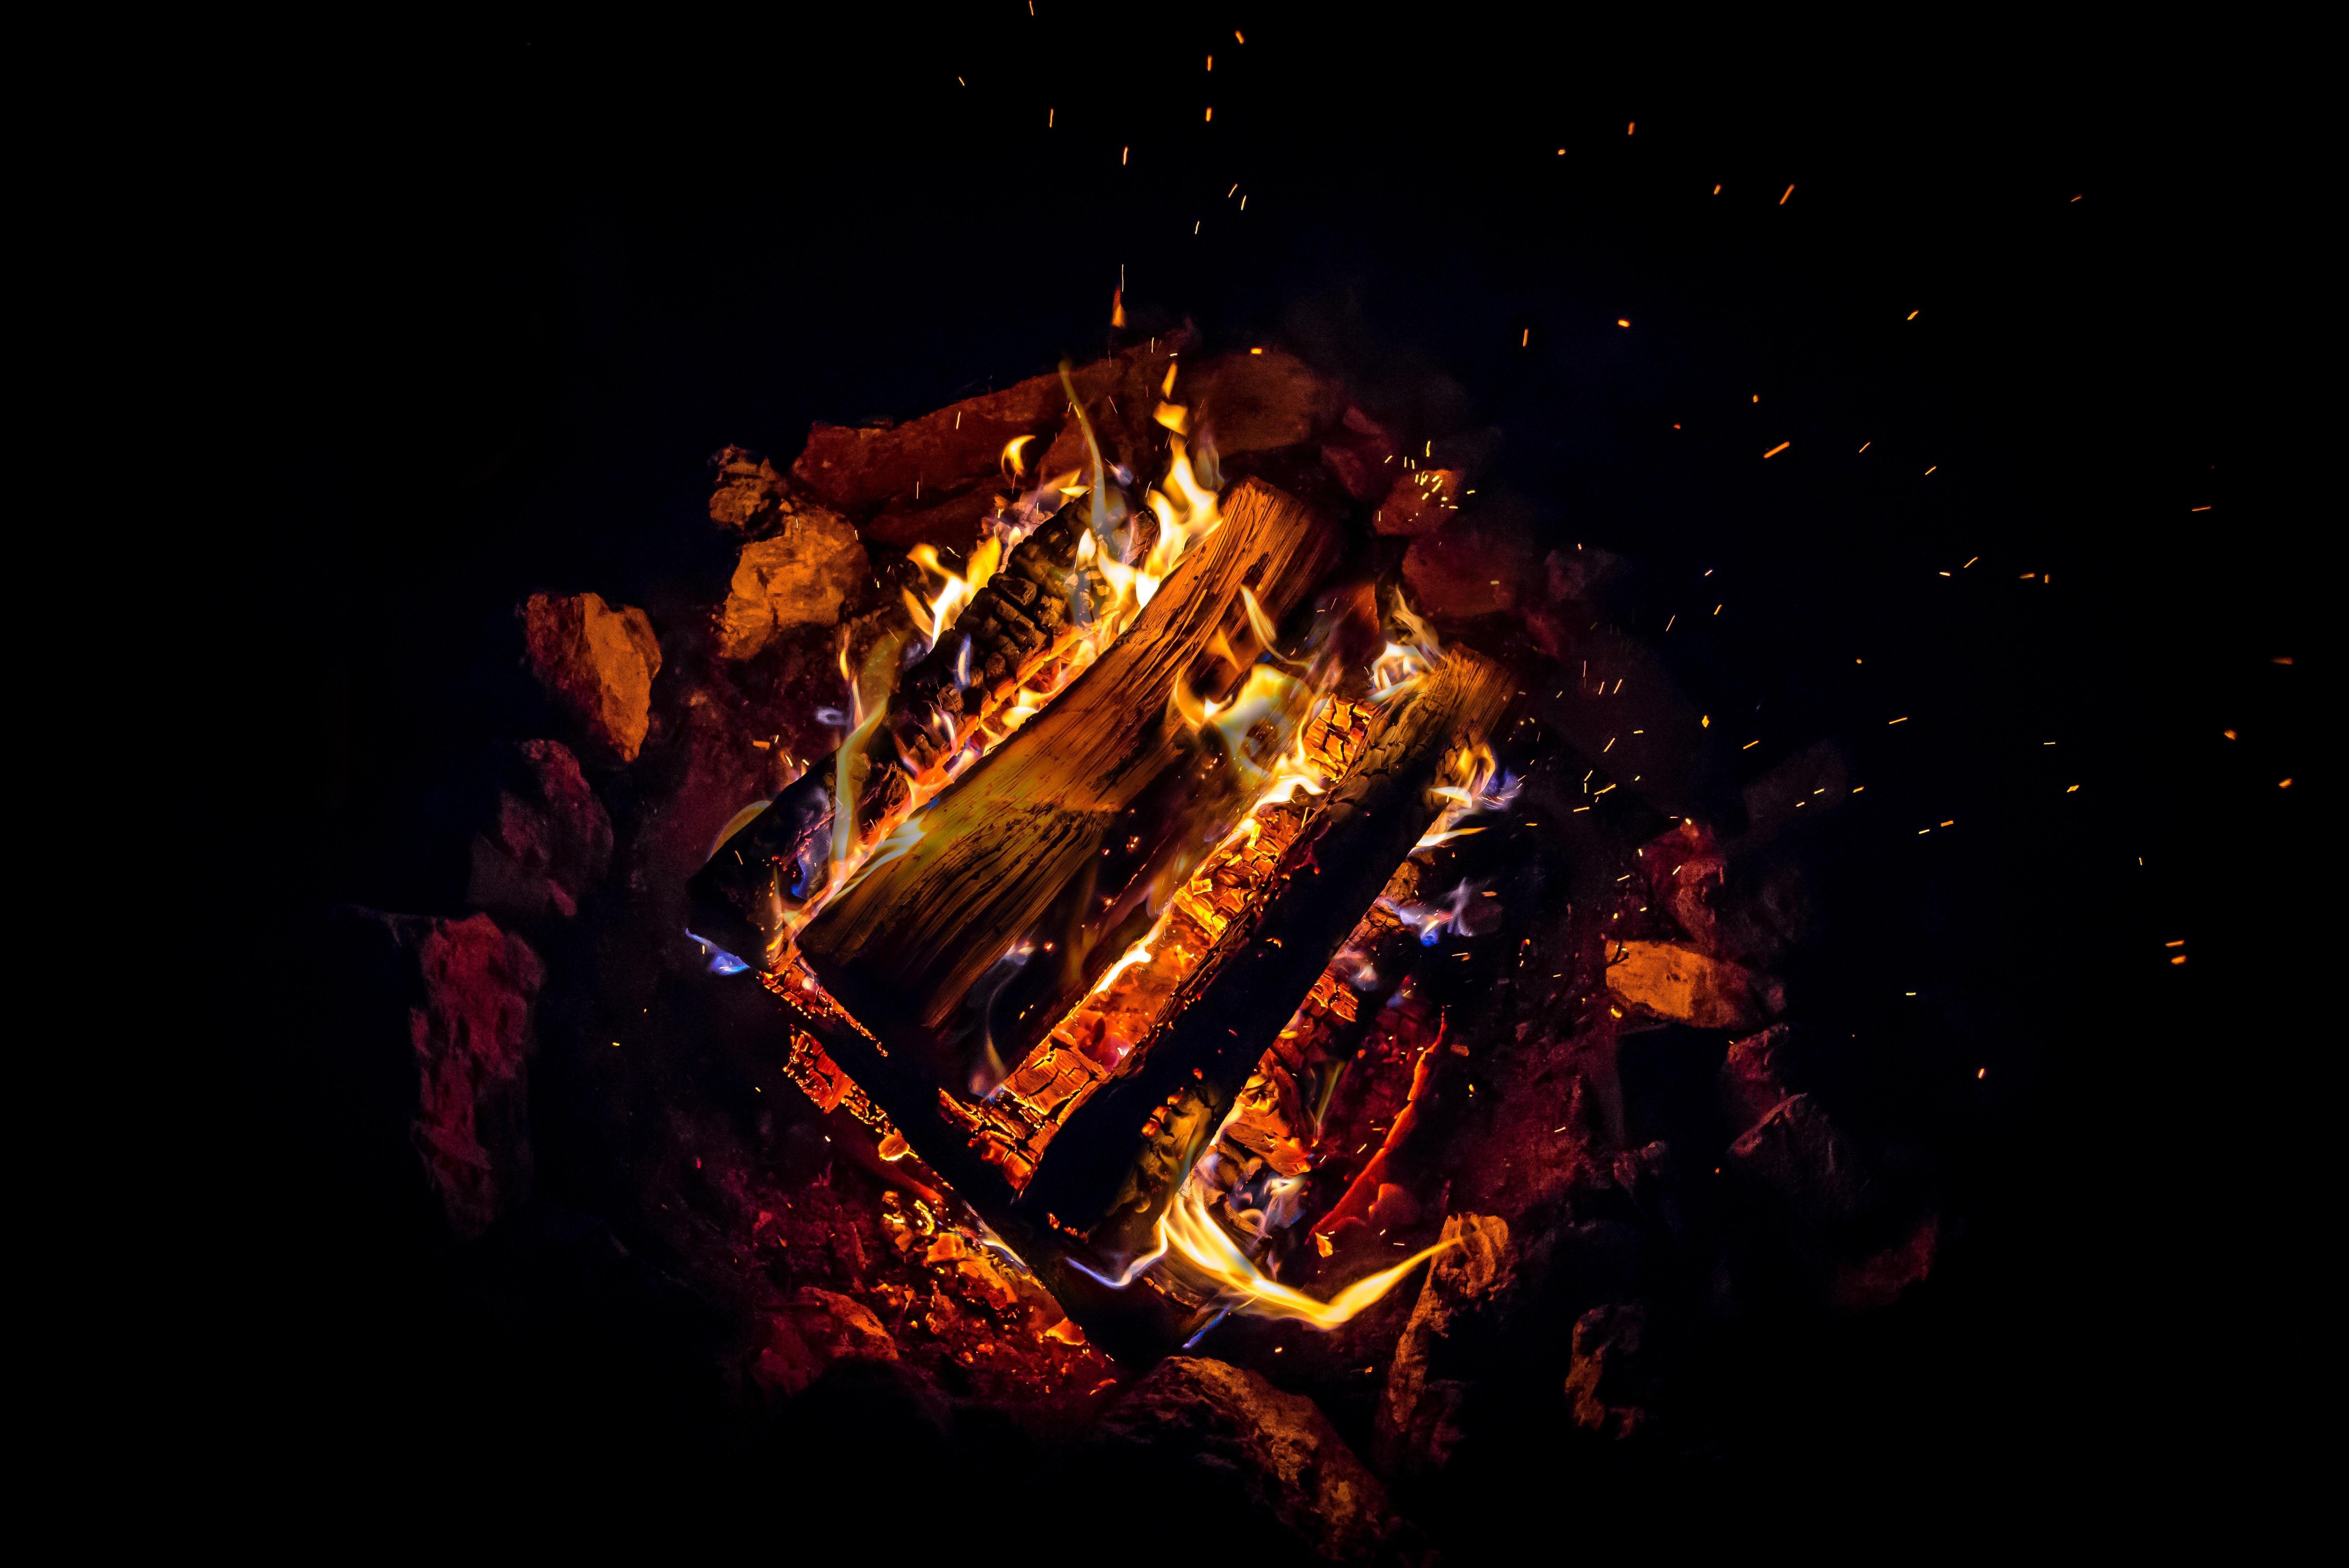 Embers 4k Wallpapers For Your Desktop Or Mobile Screen Free And Easy To Download